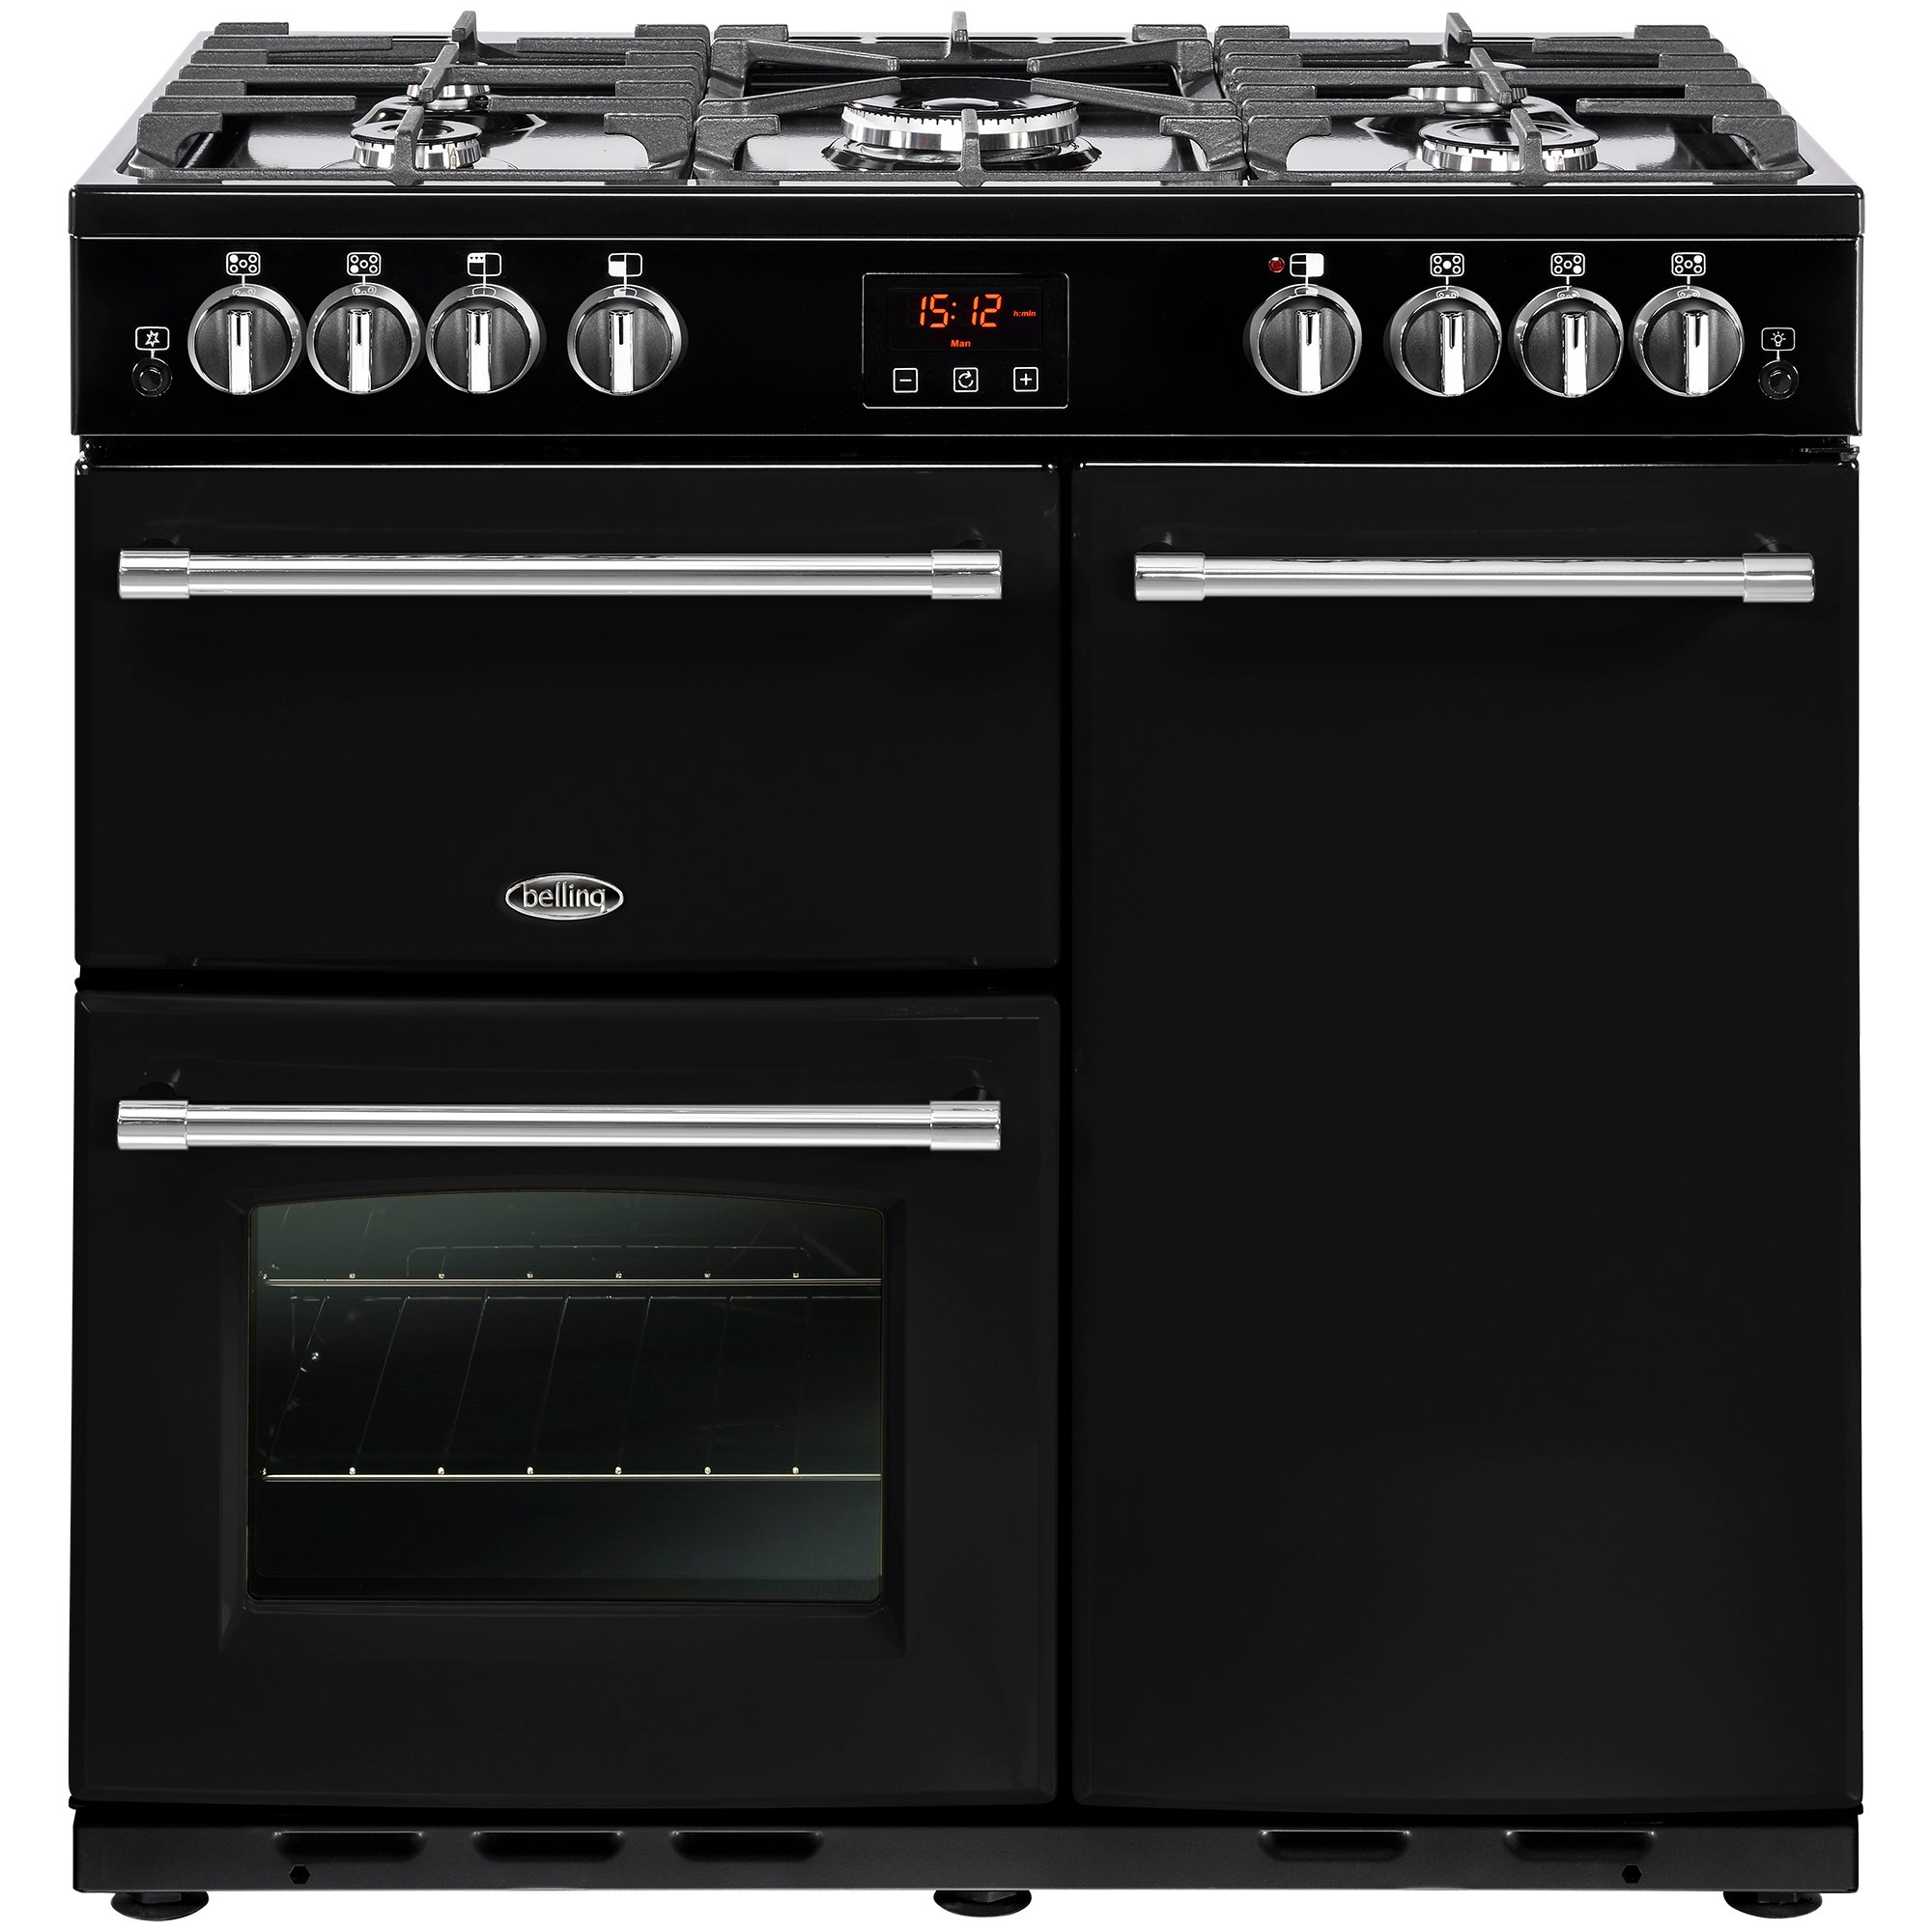 90cm gas range cooker with 4kW PowerWok burner, Maxi-Clock, market leading tall oven and easy clean enamel.